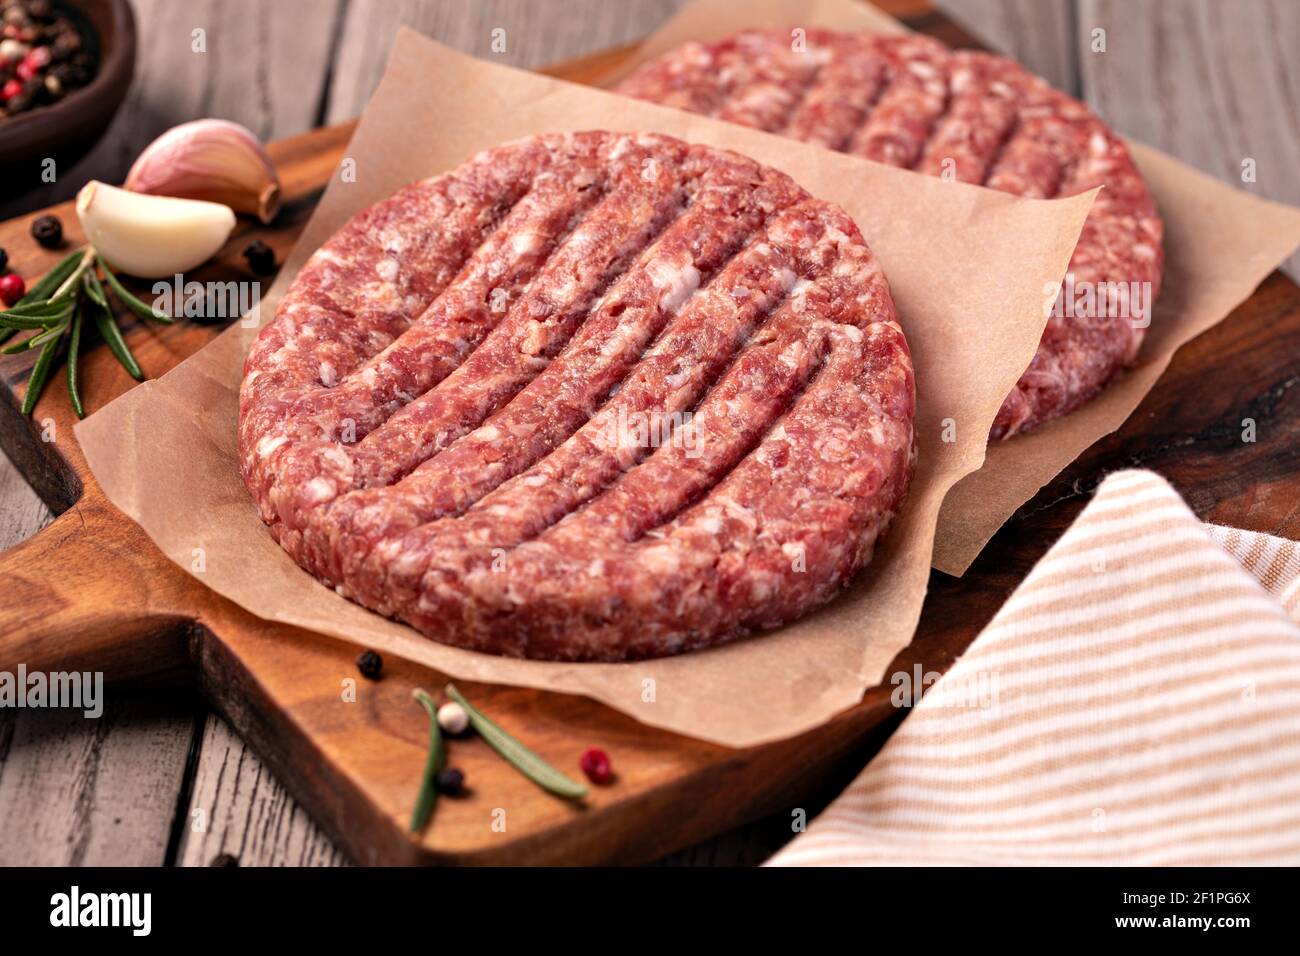 Raw Ground beef meat Stock Photo